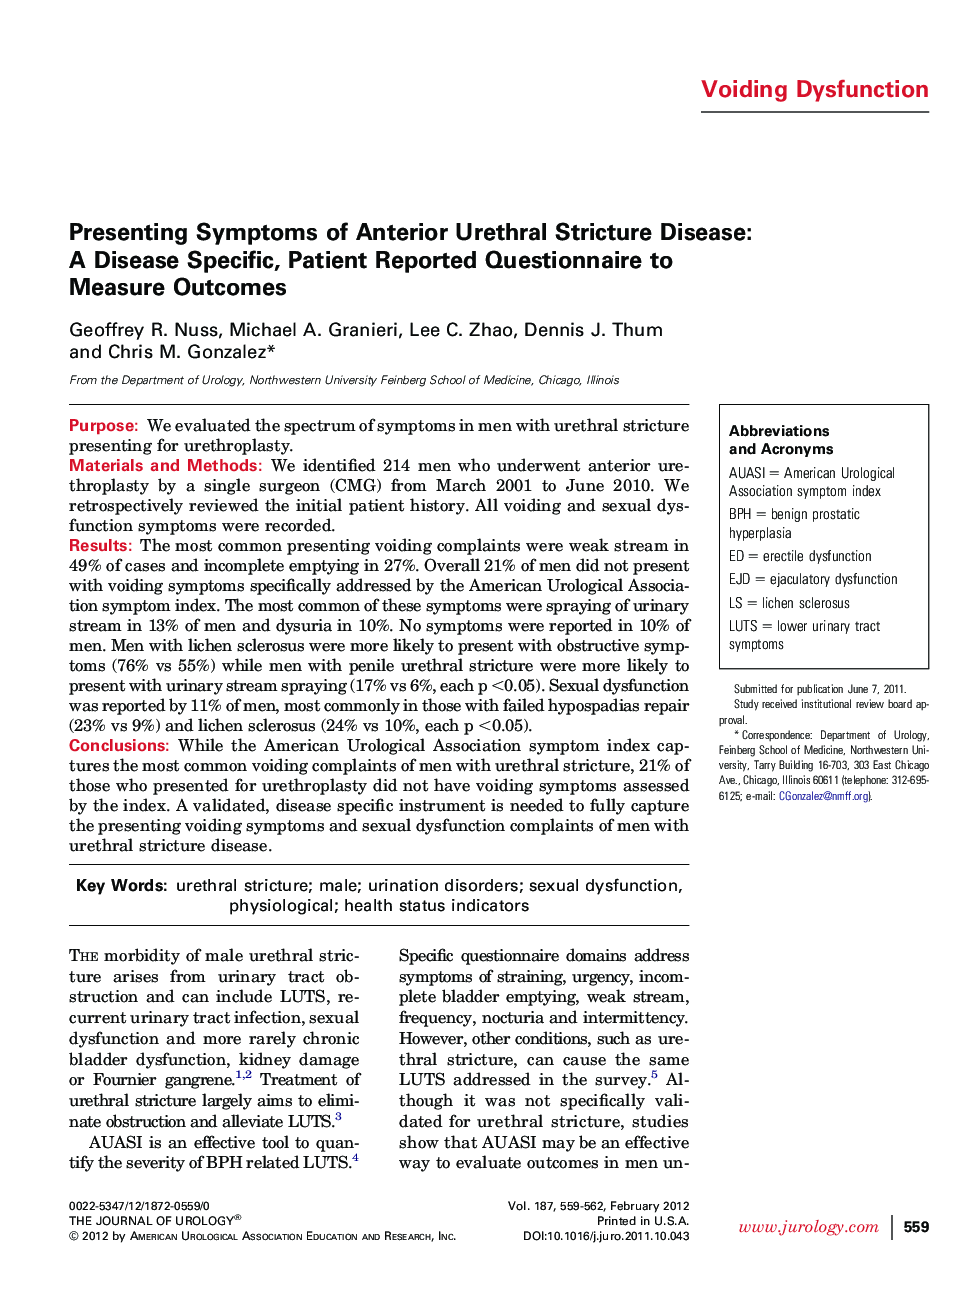 Presenting Symptoms of Anterior Urethral Stricture Disease: A Disease Specific, Patient Reported Questionnaire to Measure Outcomes